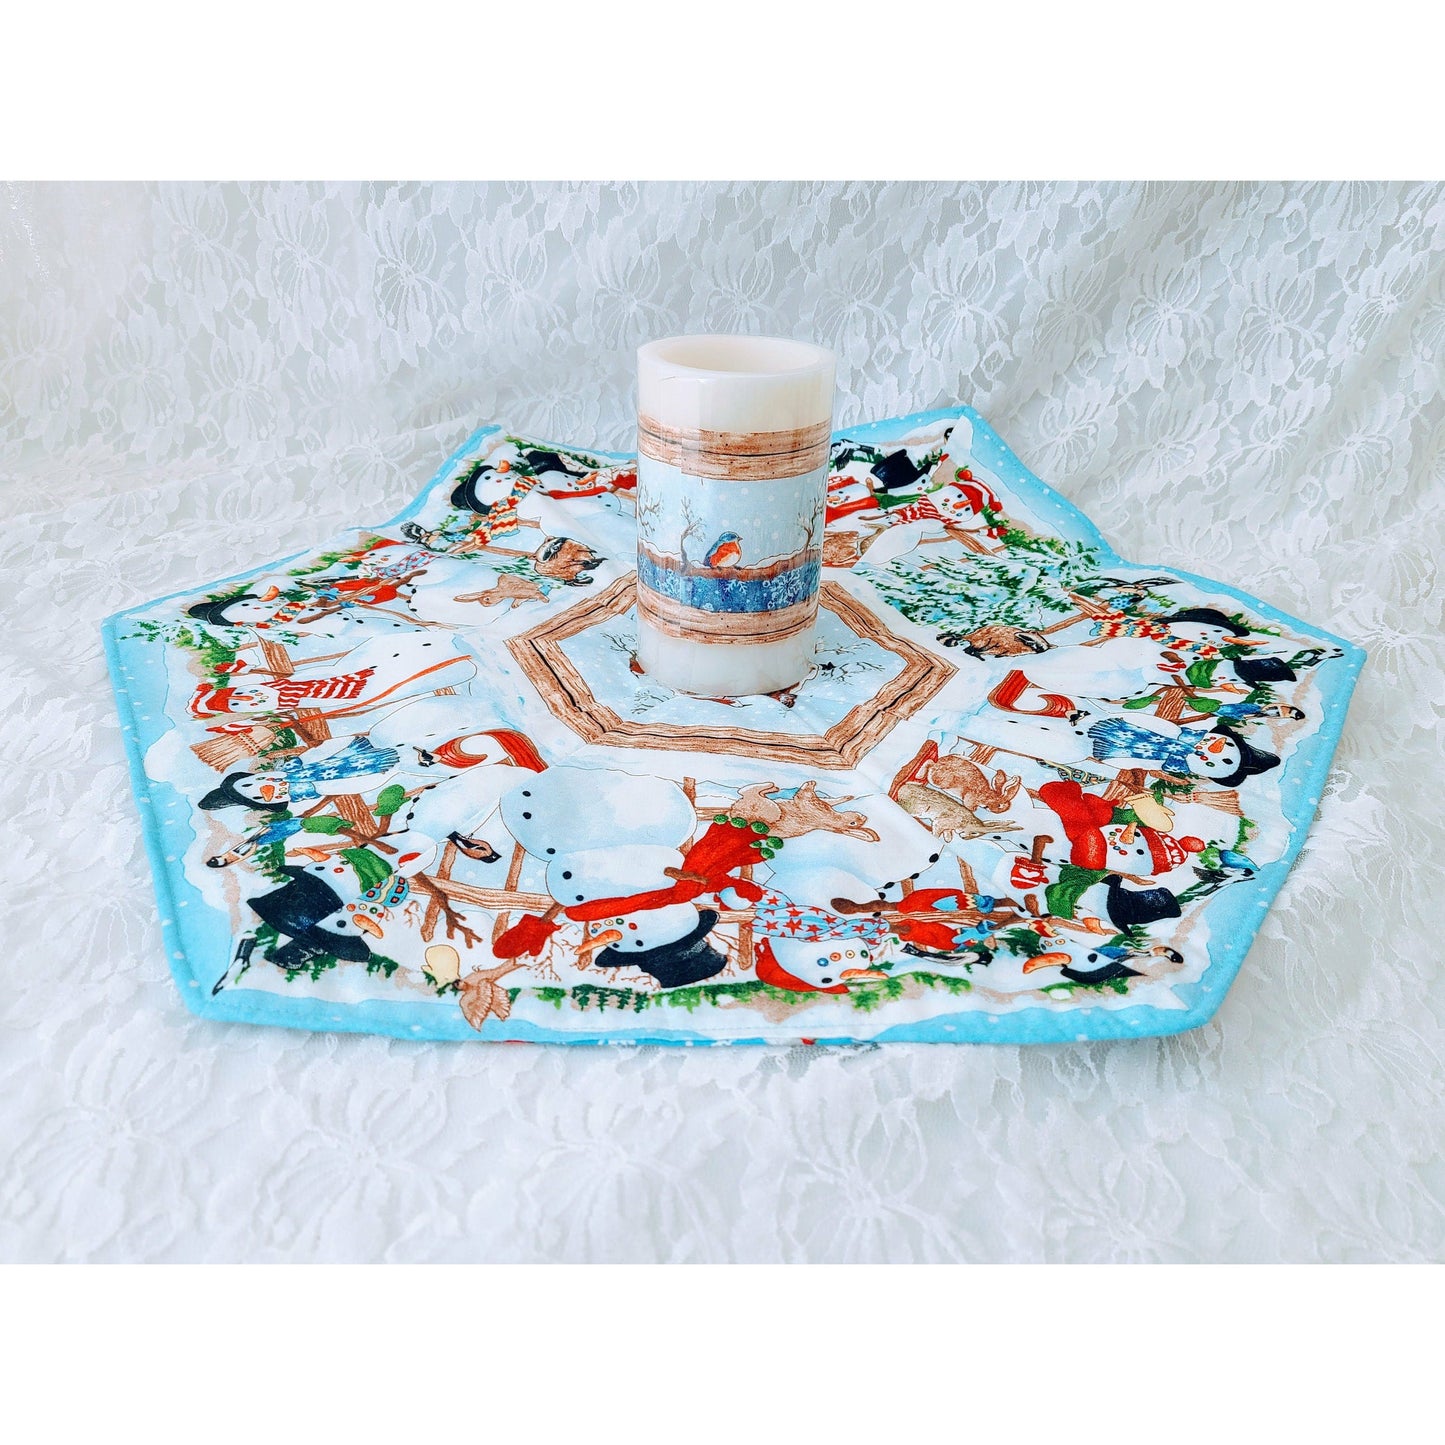 Handmade Christmas Table Runner ~Large 20" Accent Runner w/ Matching Battery Candle ~ Snowman Blue Cute ~ Unique! ~OOAK Holiday Décor